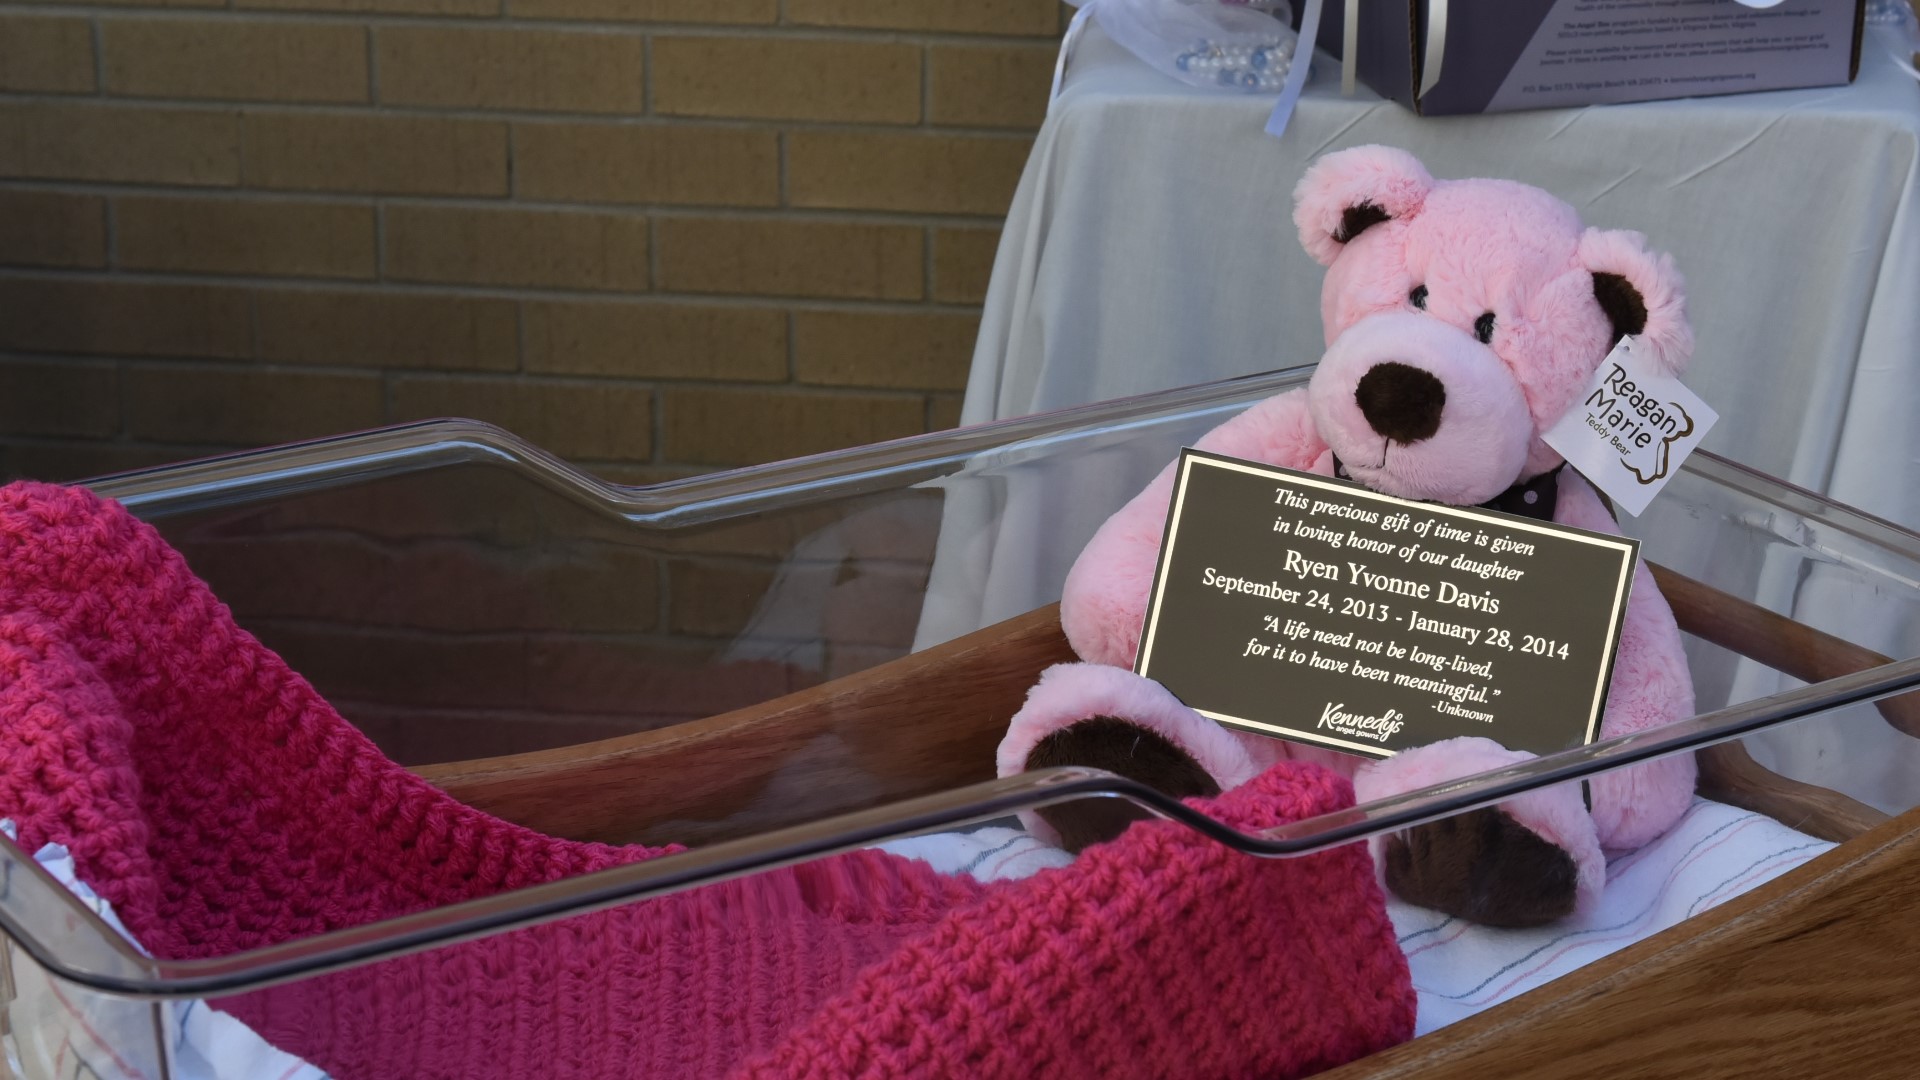 They hope the cradle can give families chances to create memories and grieve.